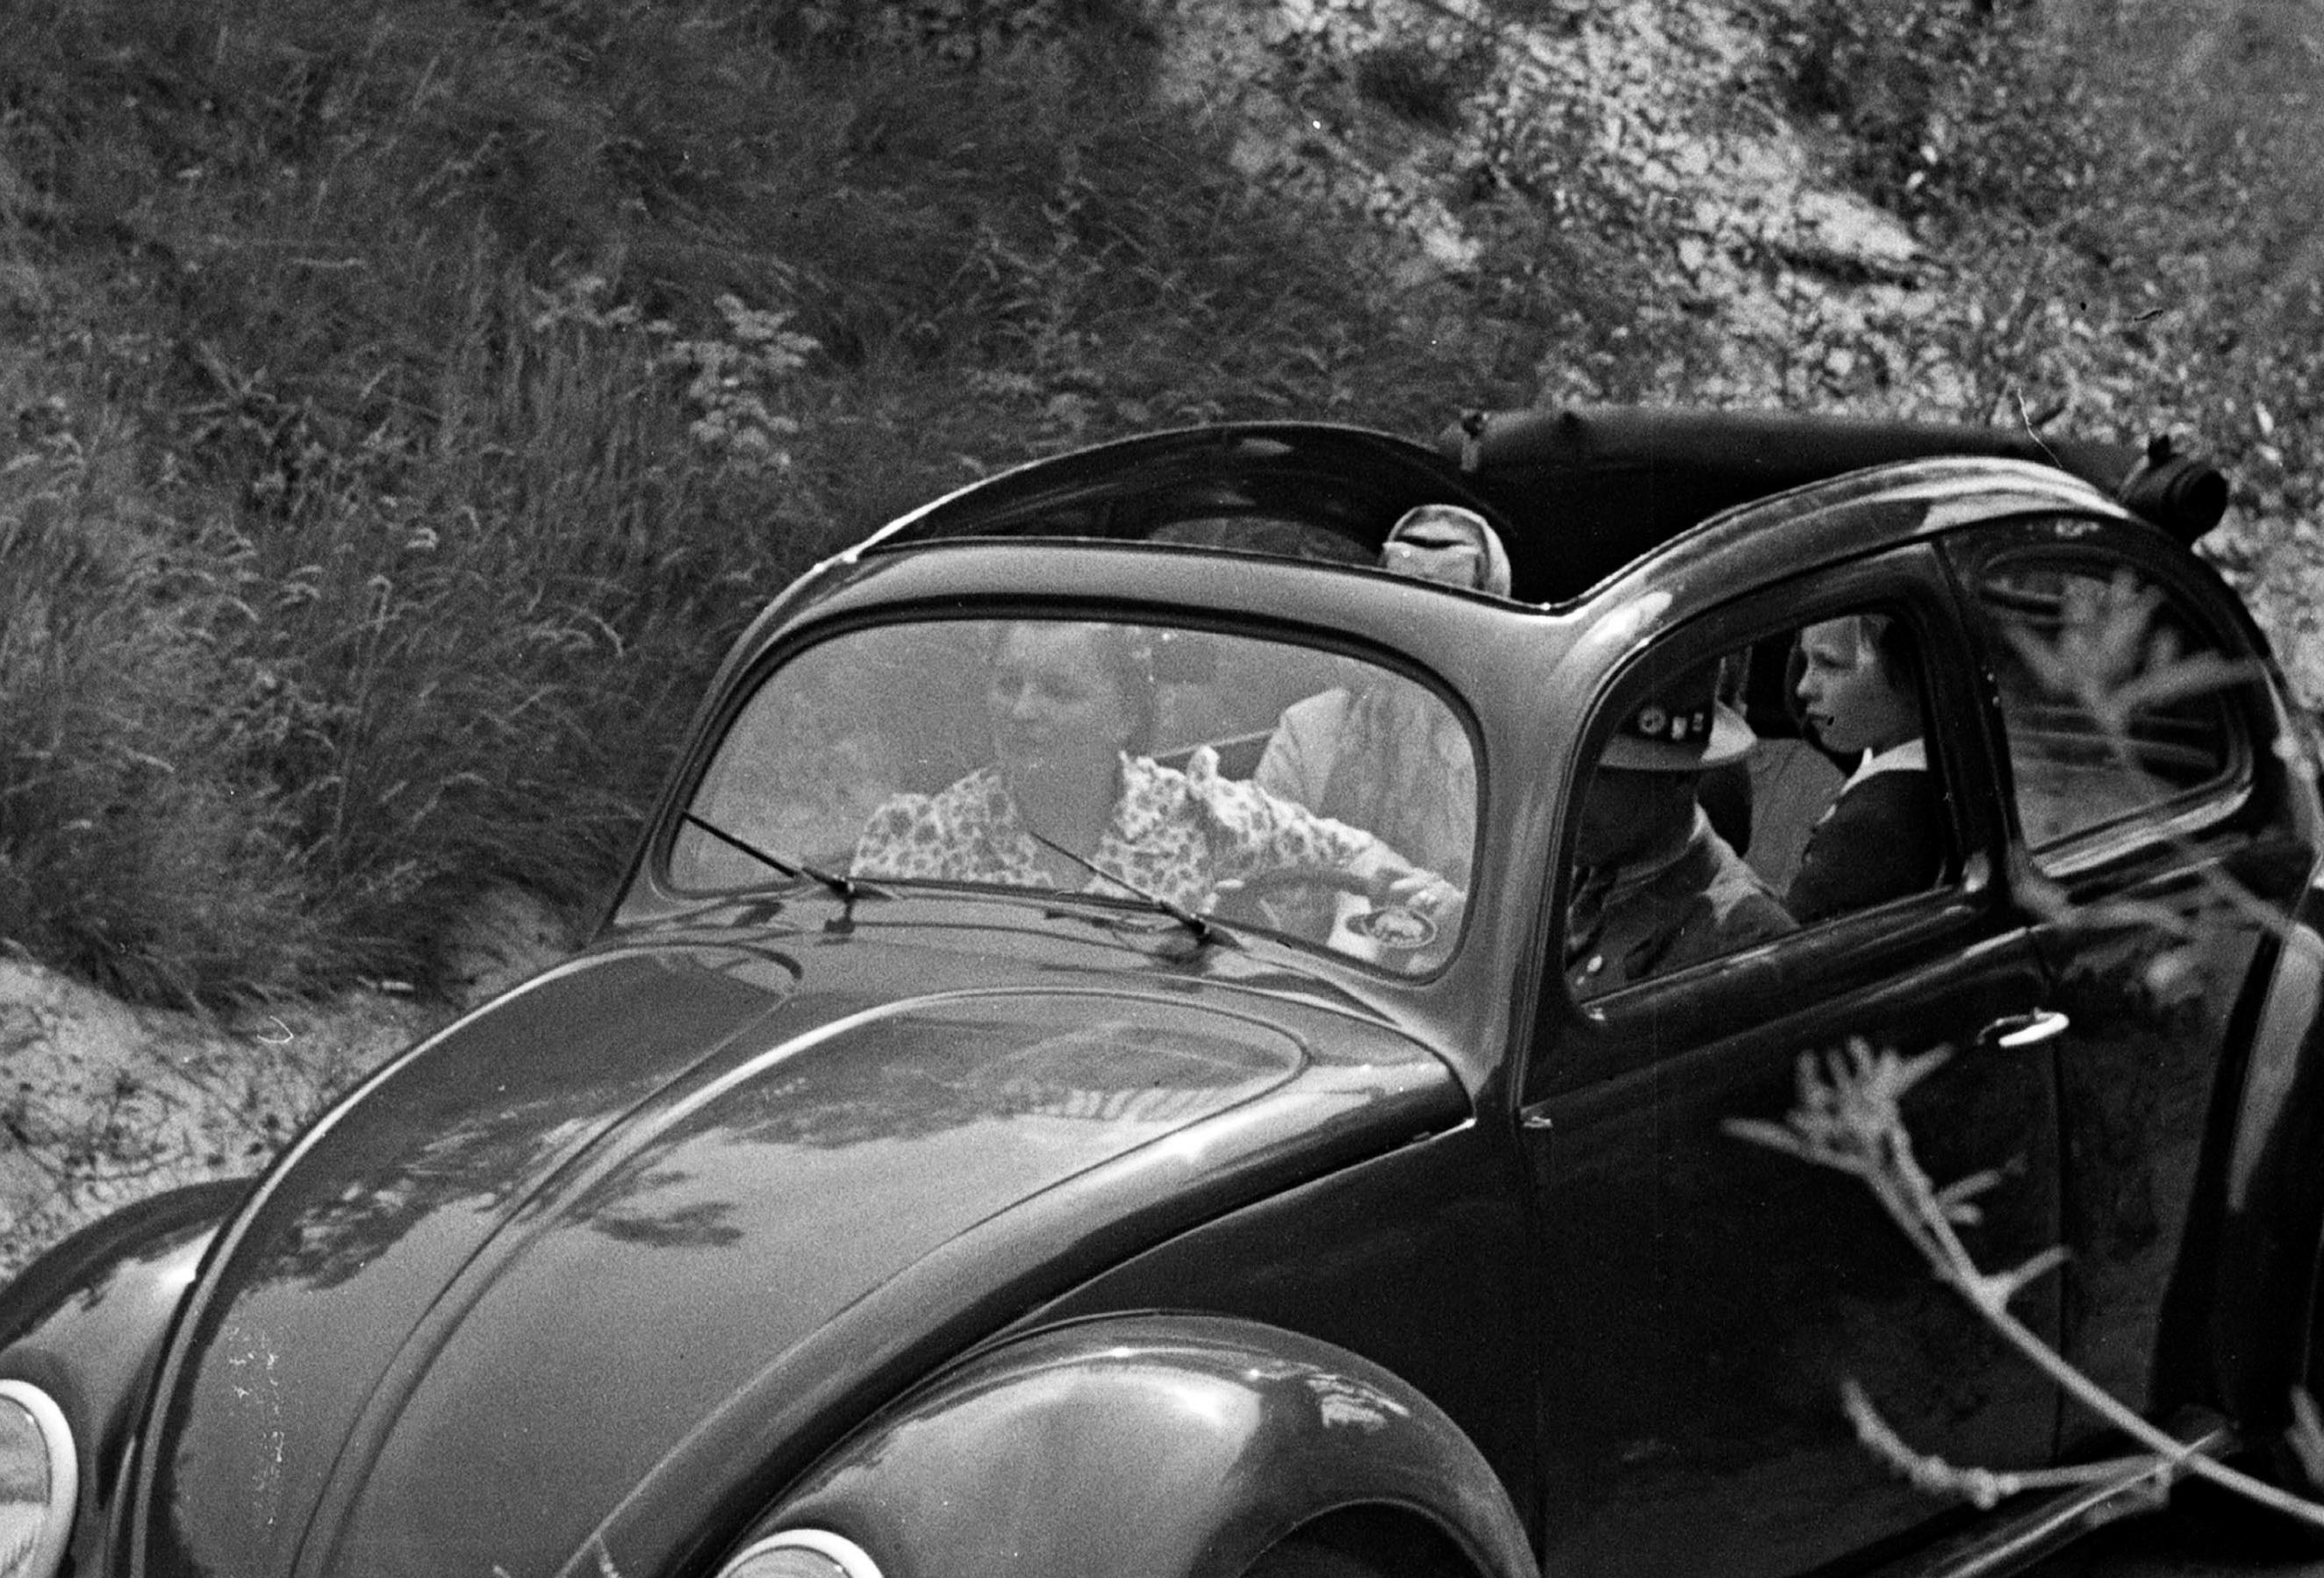  Travelling by car in the Volkswagen beetle, Germany 1939 Printed Later  - Photograph by Karl Heinrich Lämmel